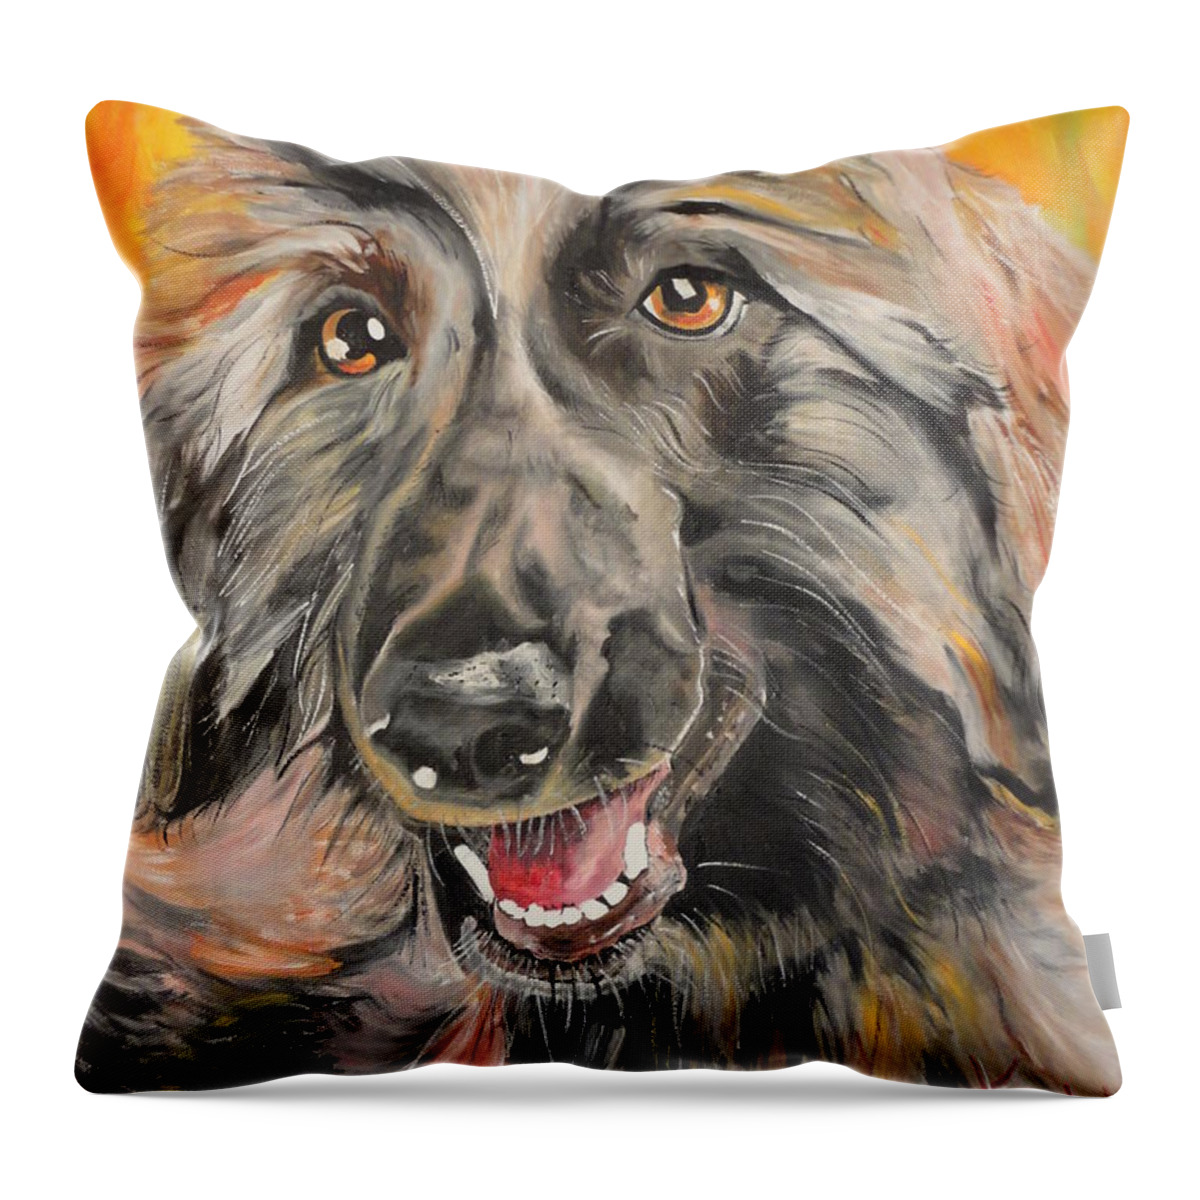 Afghan Throw Pillow featuring the painting Afghan by PainterArtist FIN